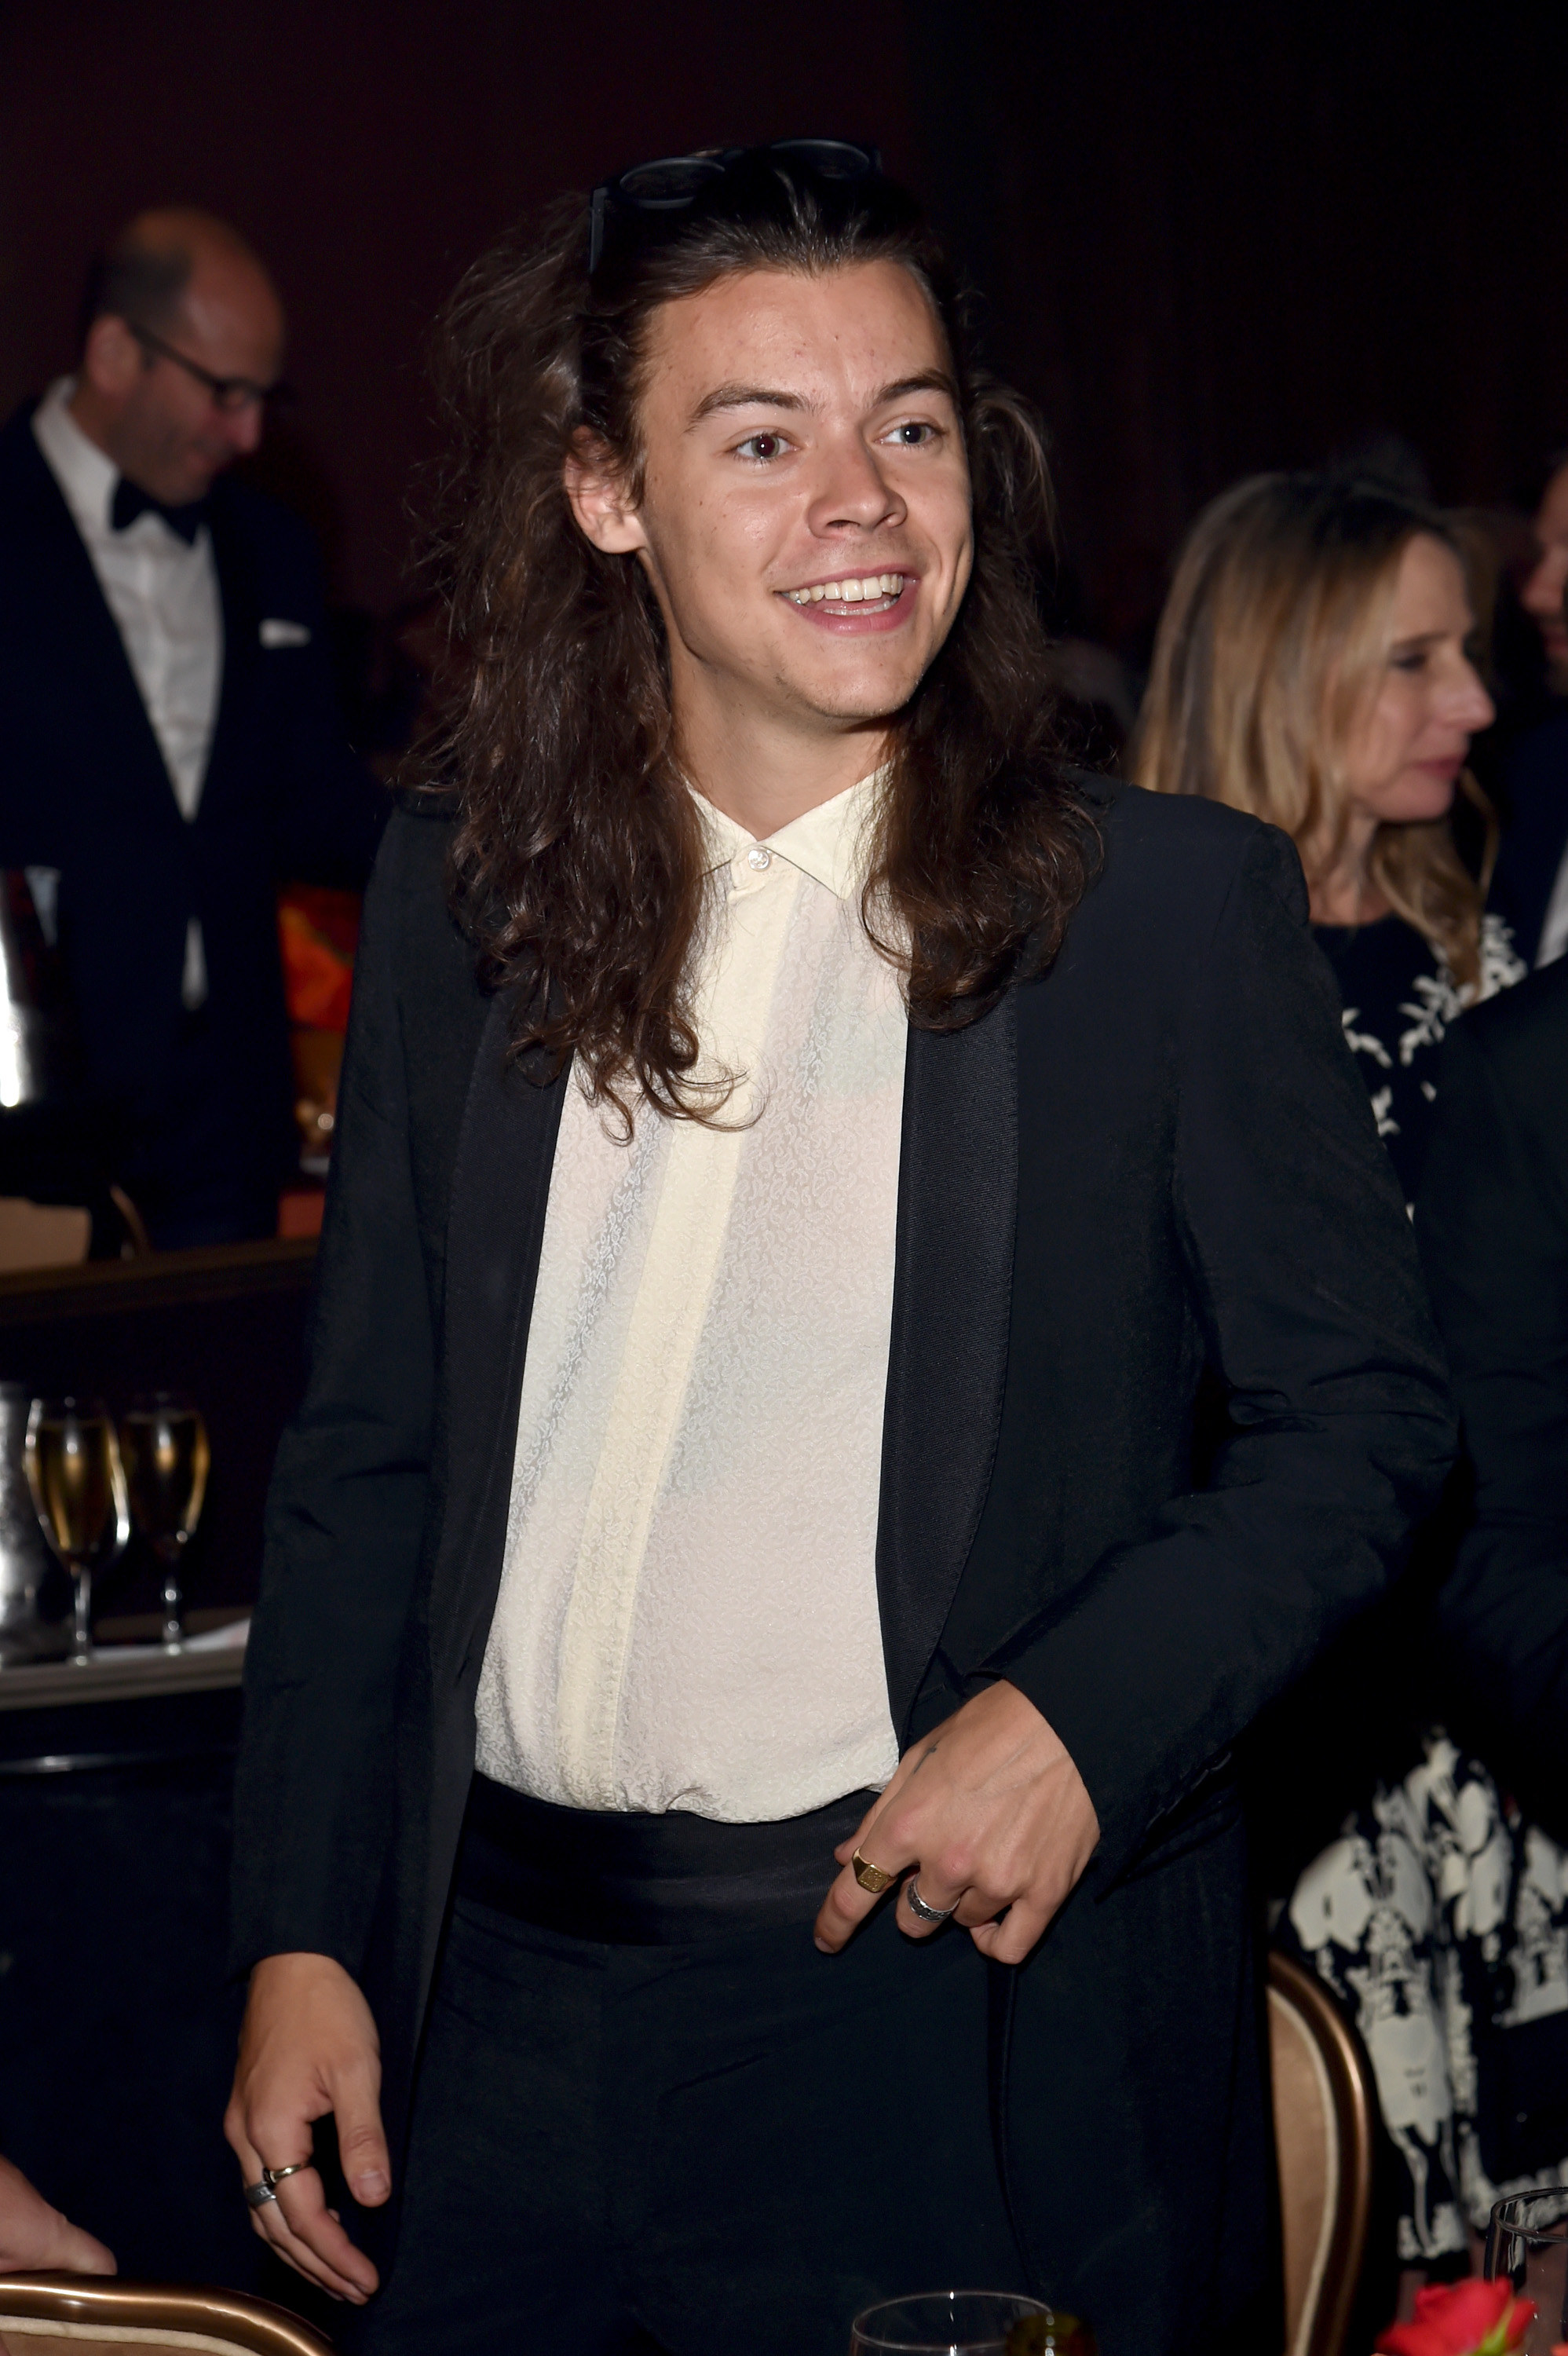 Harry Styles smiling at an event